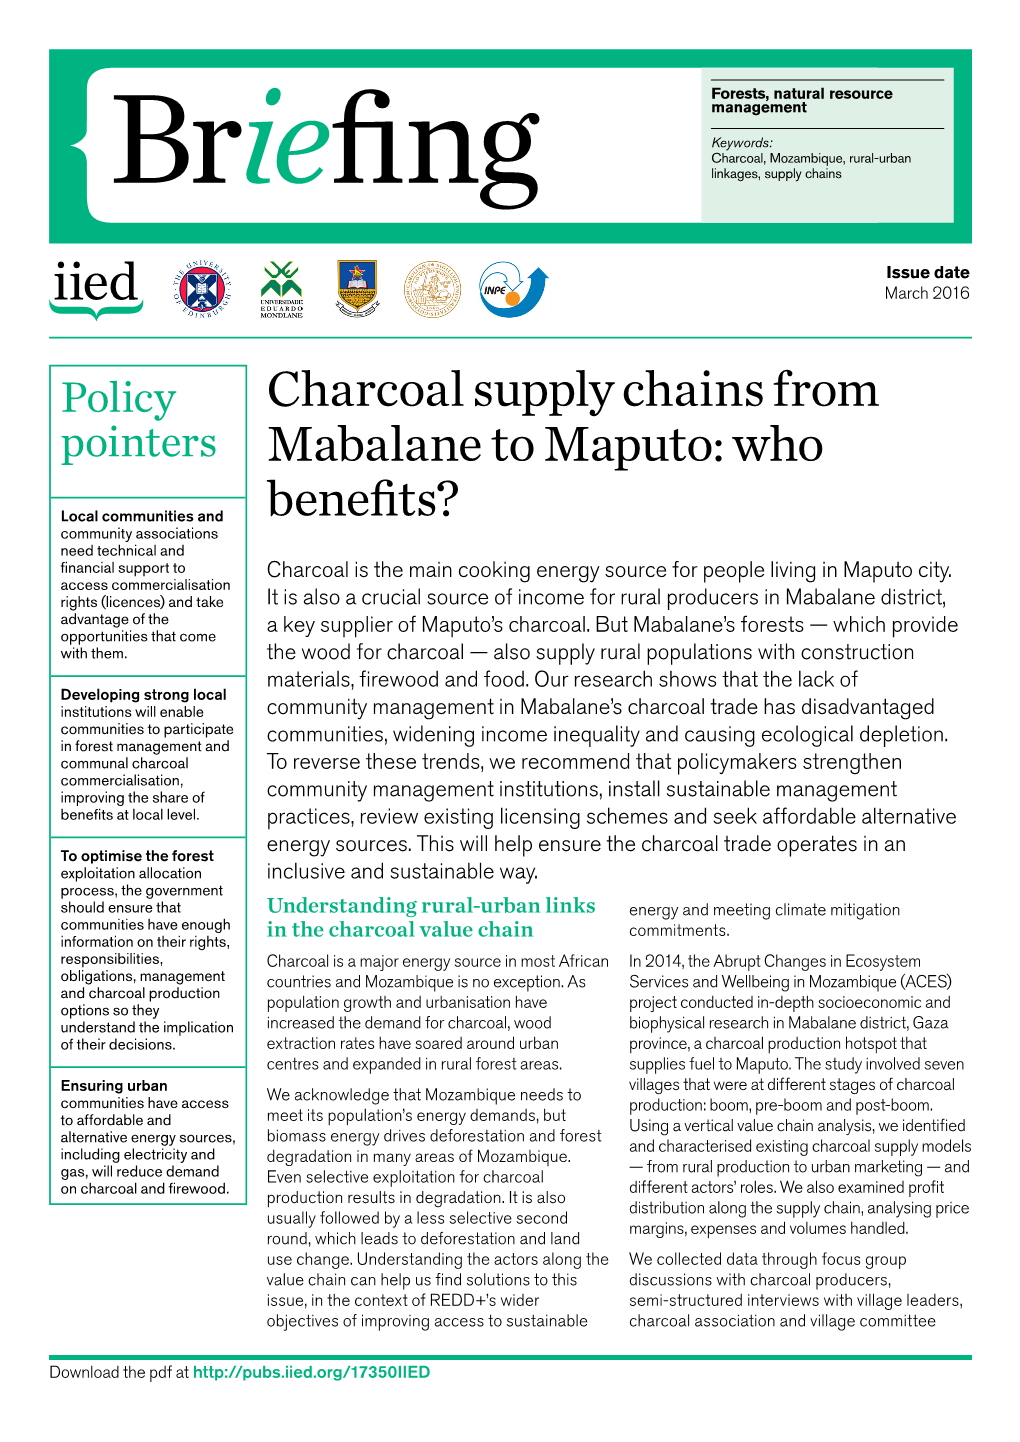 Charcoal Supply Chains from Mabalane to Maputo